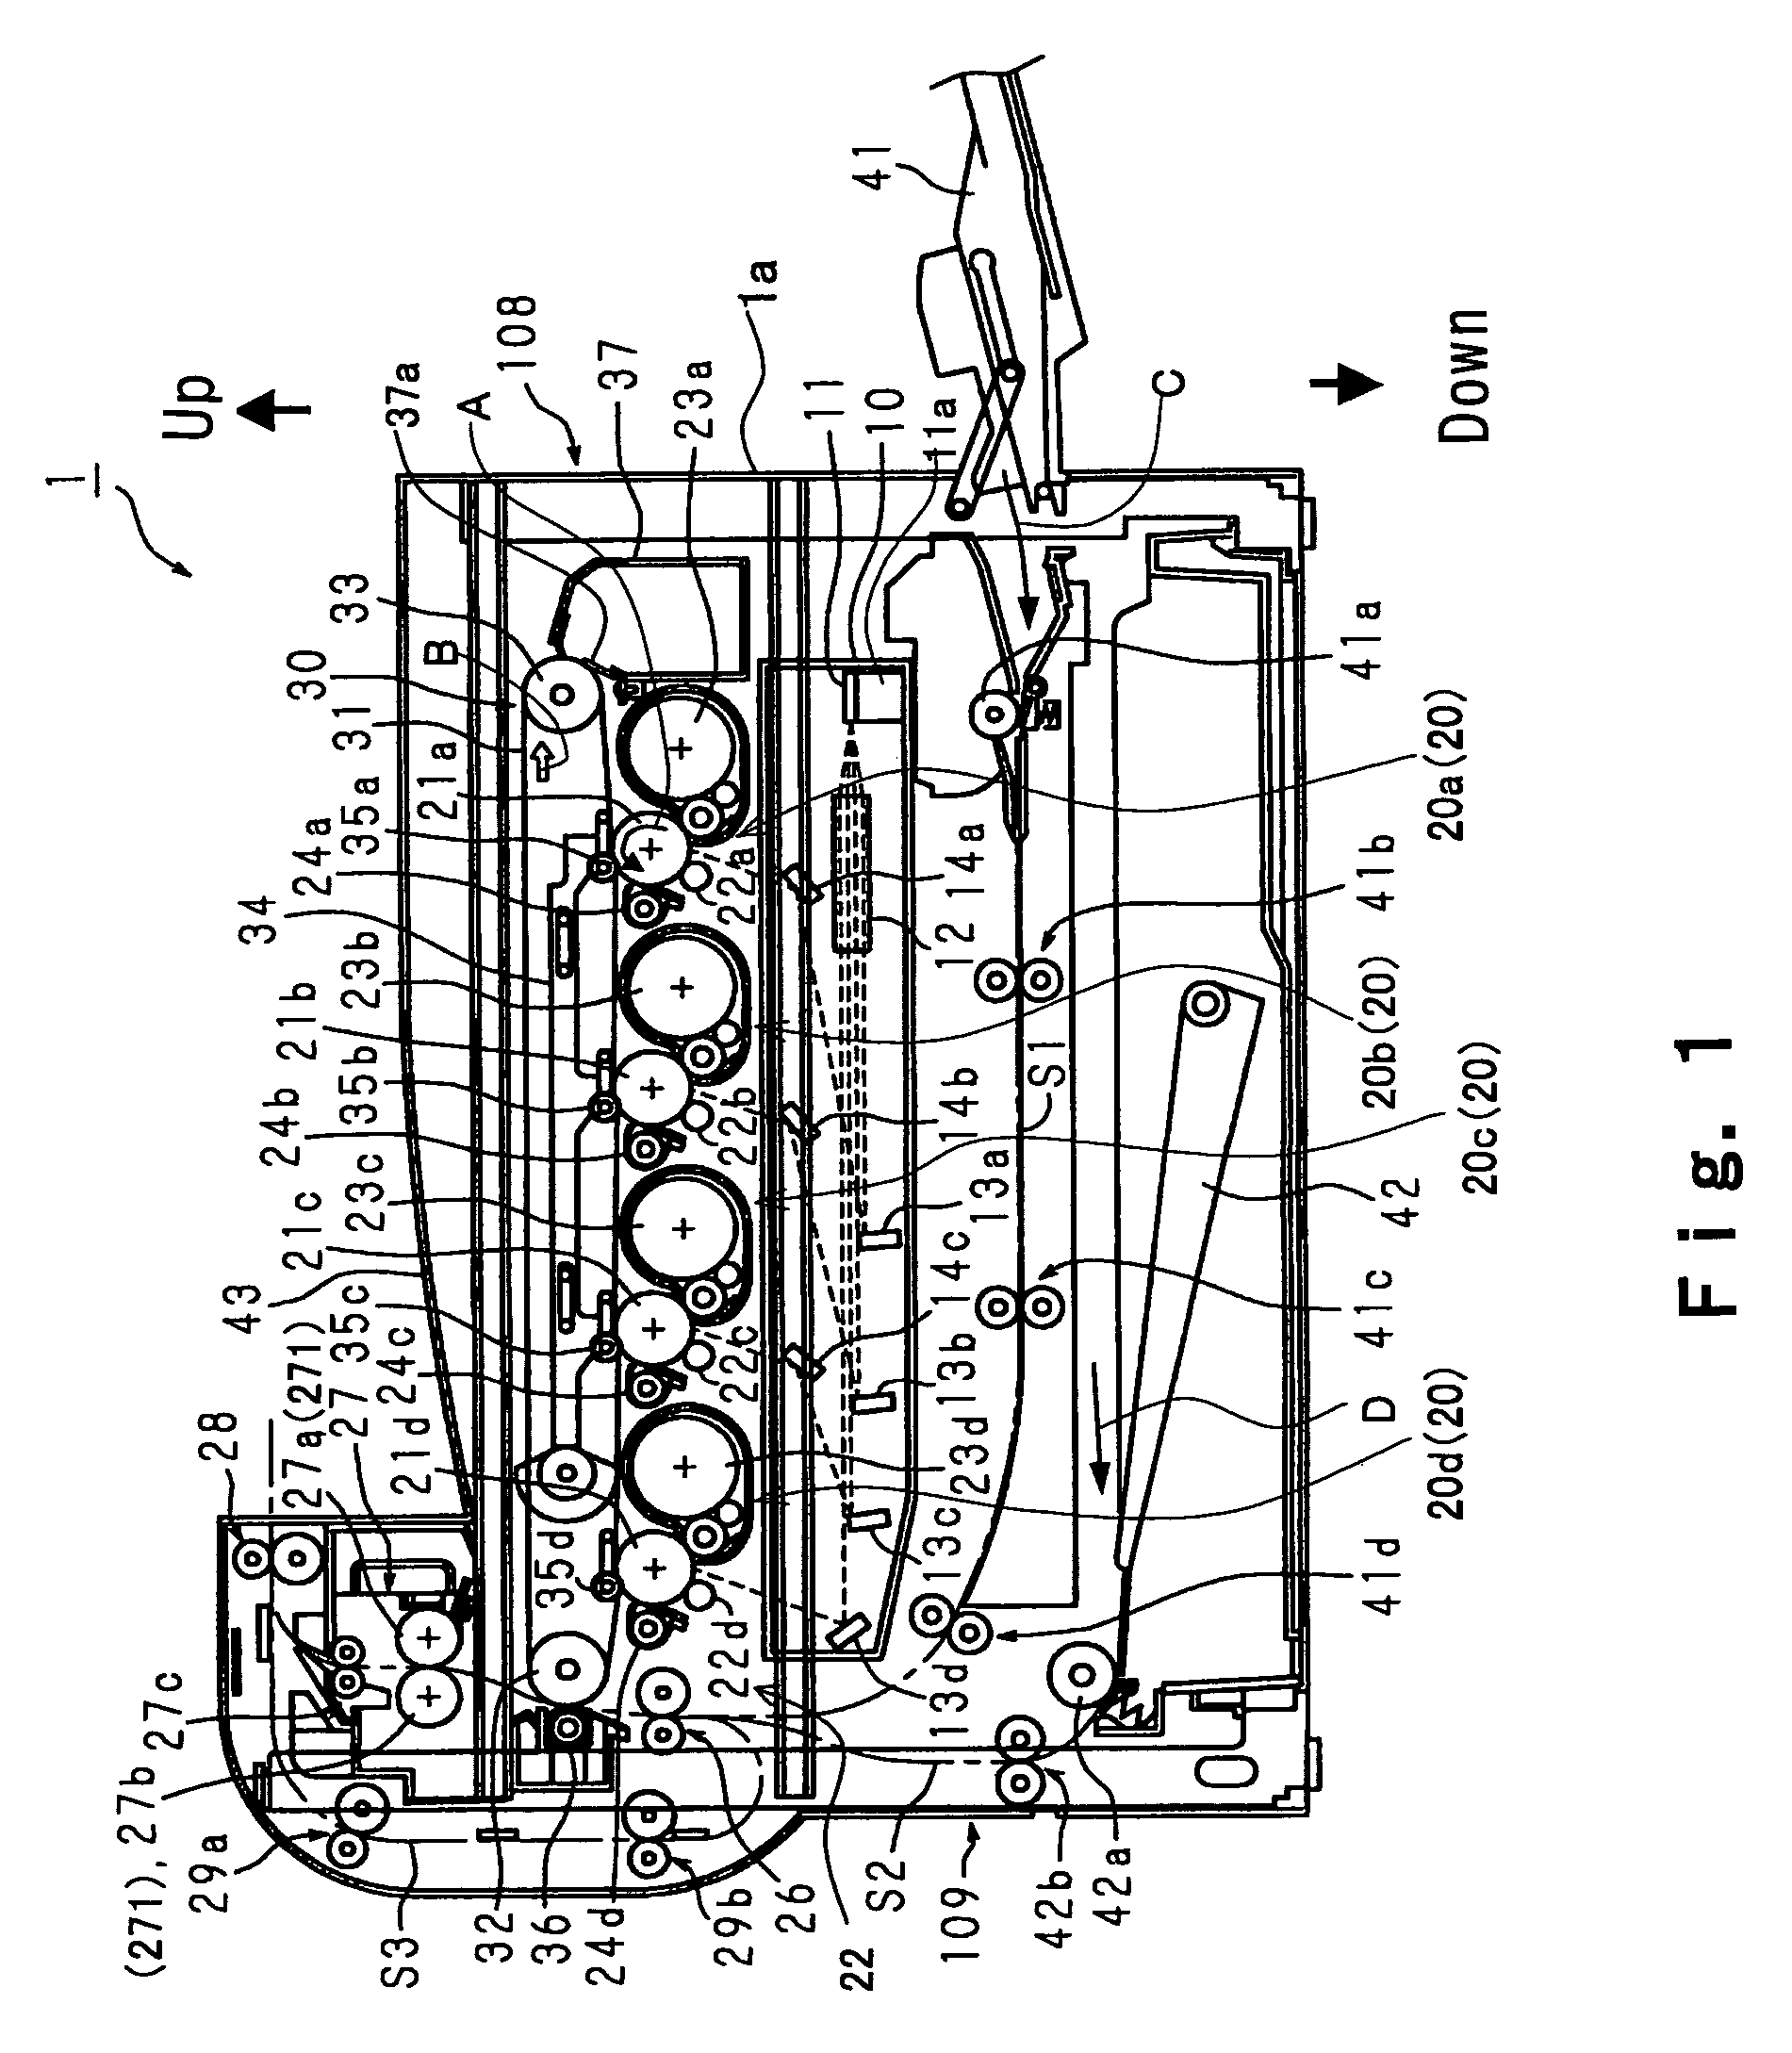 Ozone exhaust system for image forming apparatus